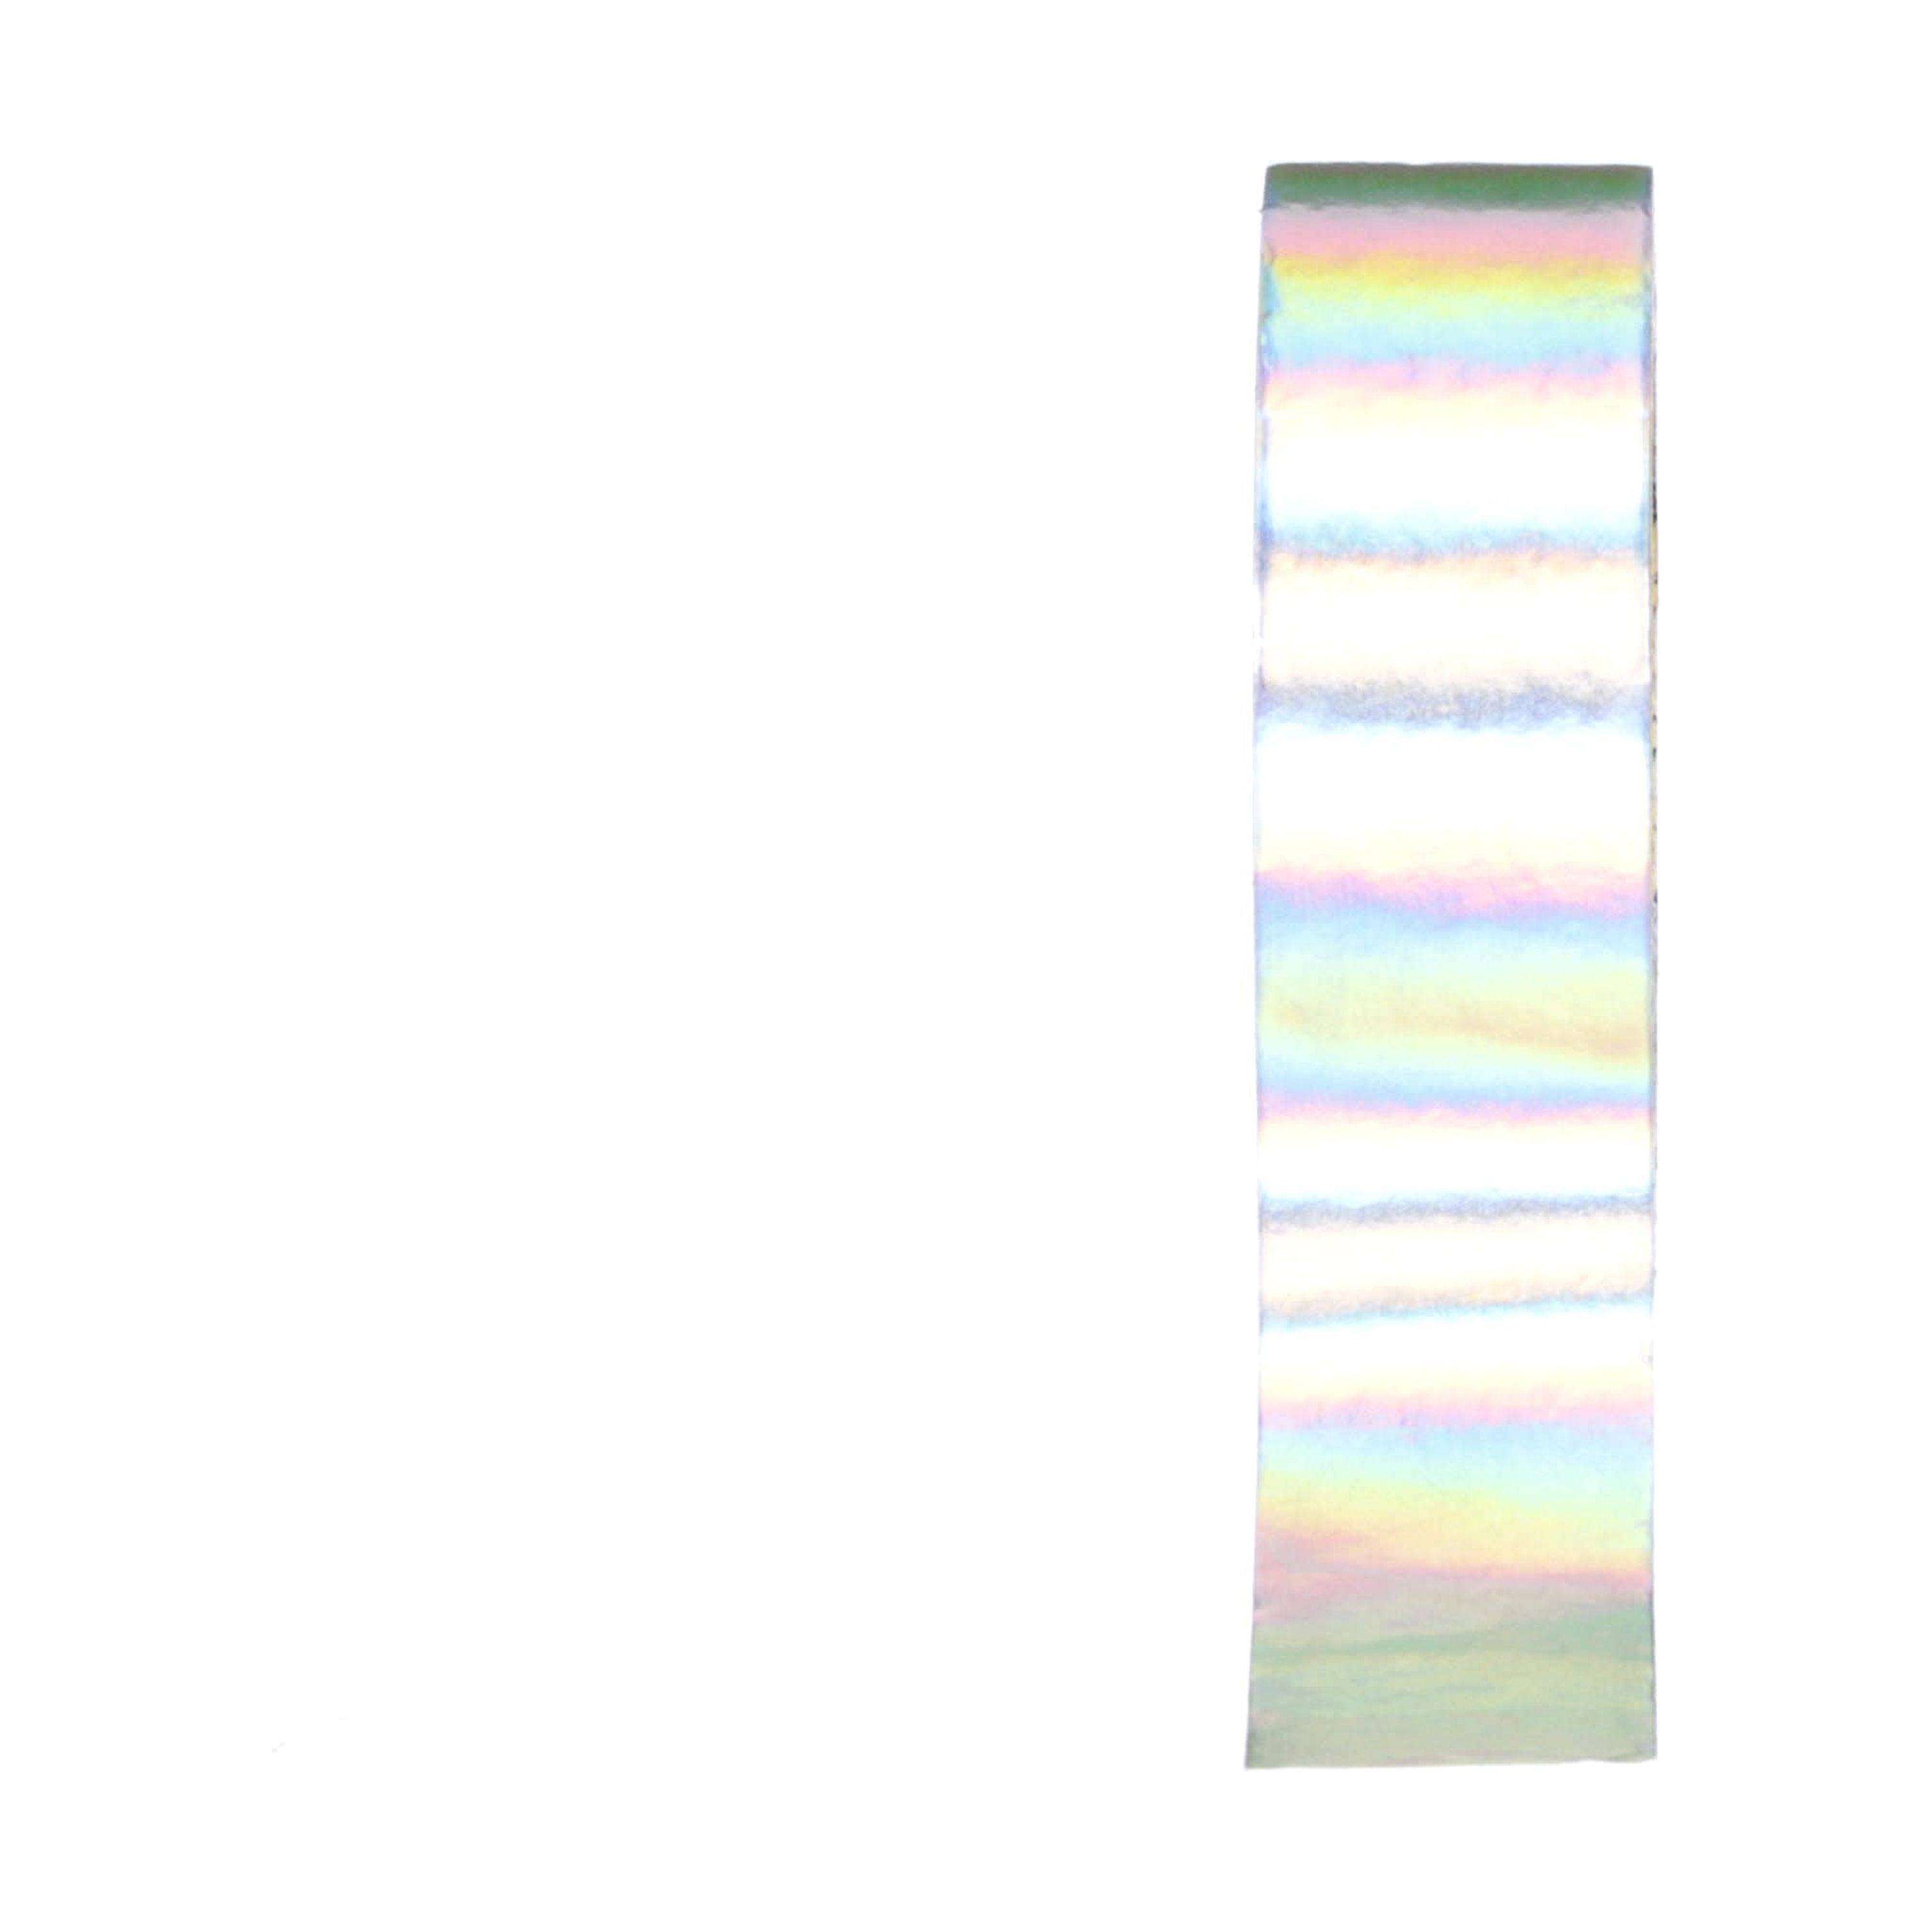 Scotch® Expressions Washi Tape, 0.59 in x 275 in, Iridescent White - image 3 of 5